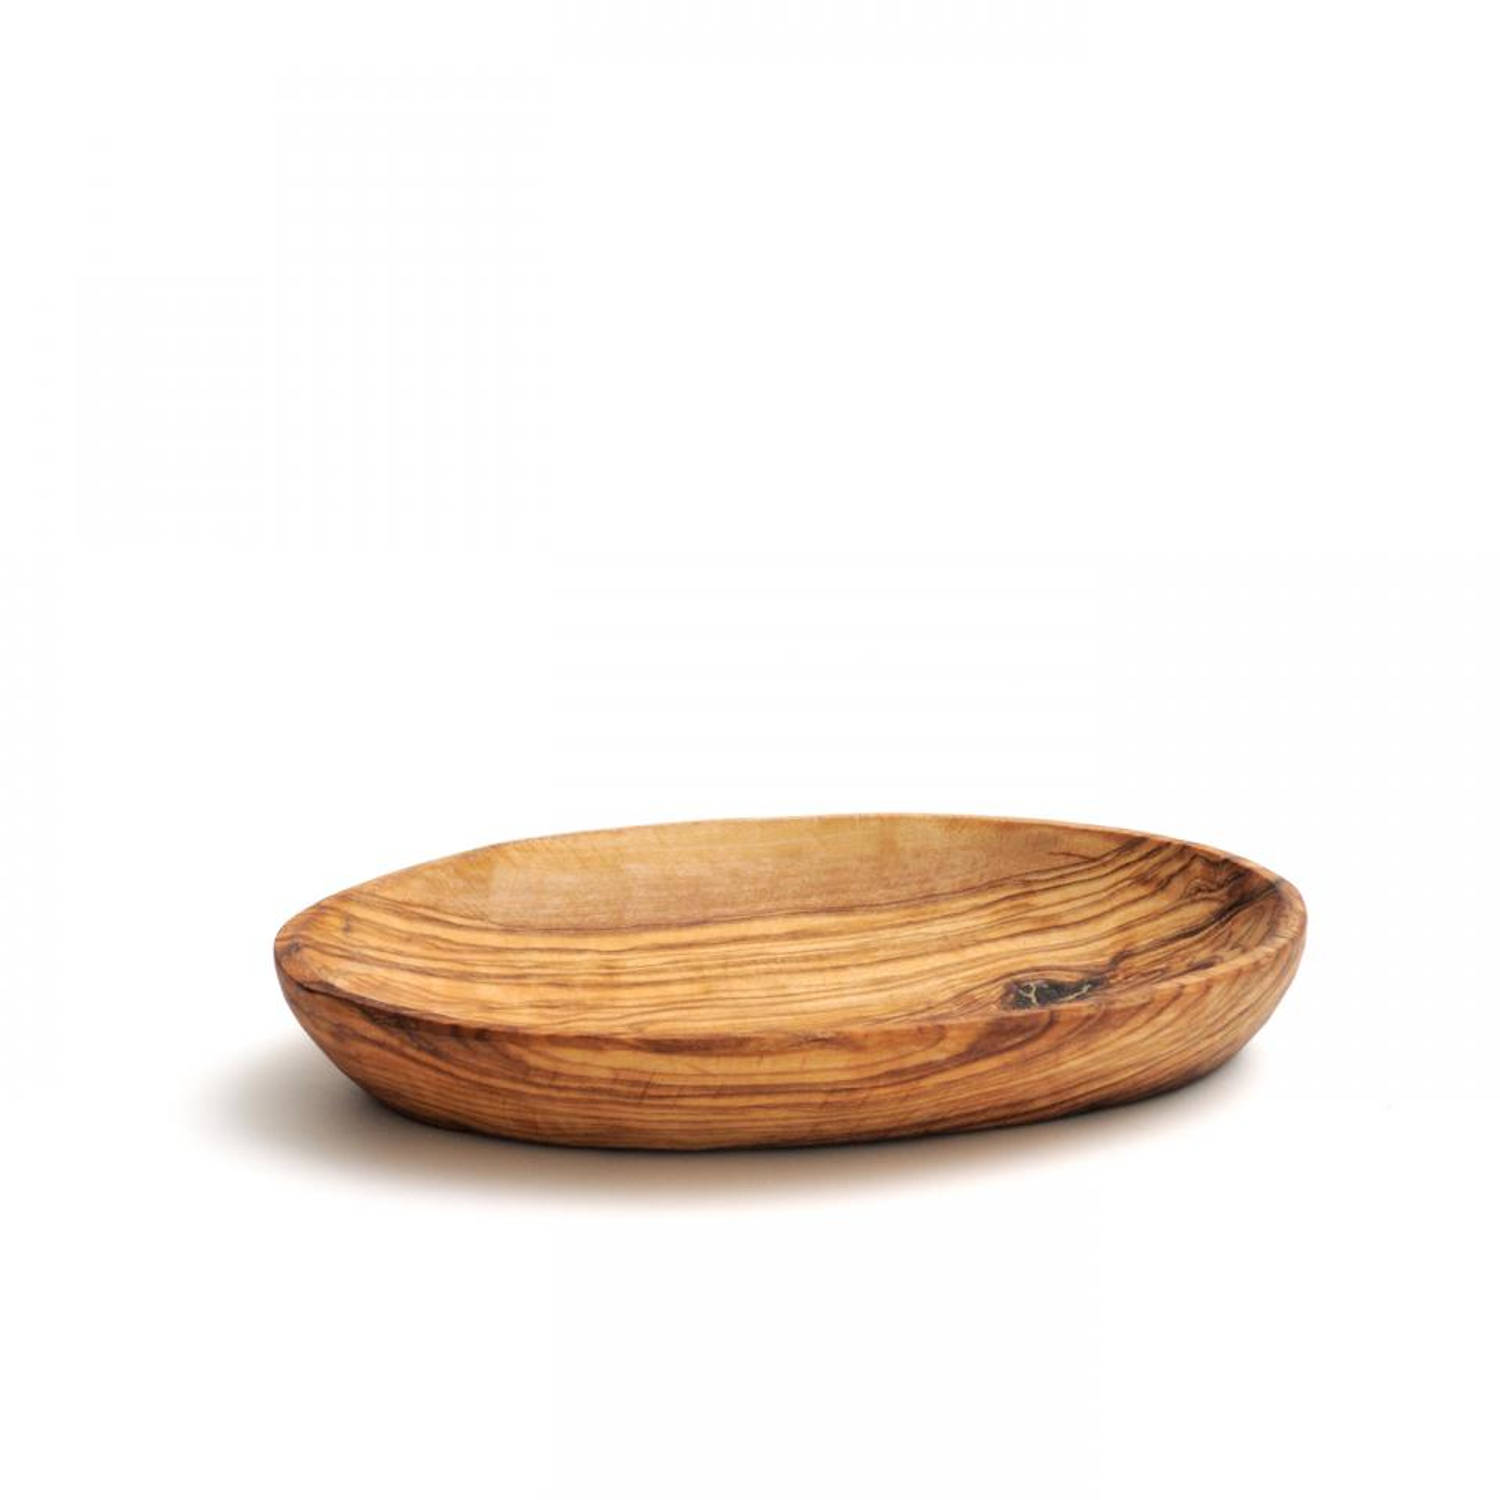 Schaal olijfhout (ovaal / 18,5 cm) - Bowls and Dishes